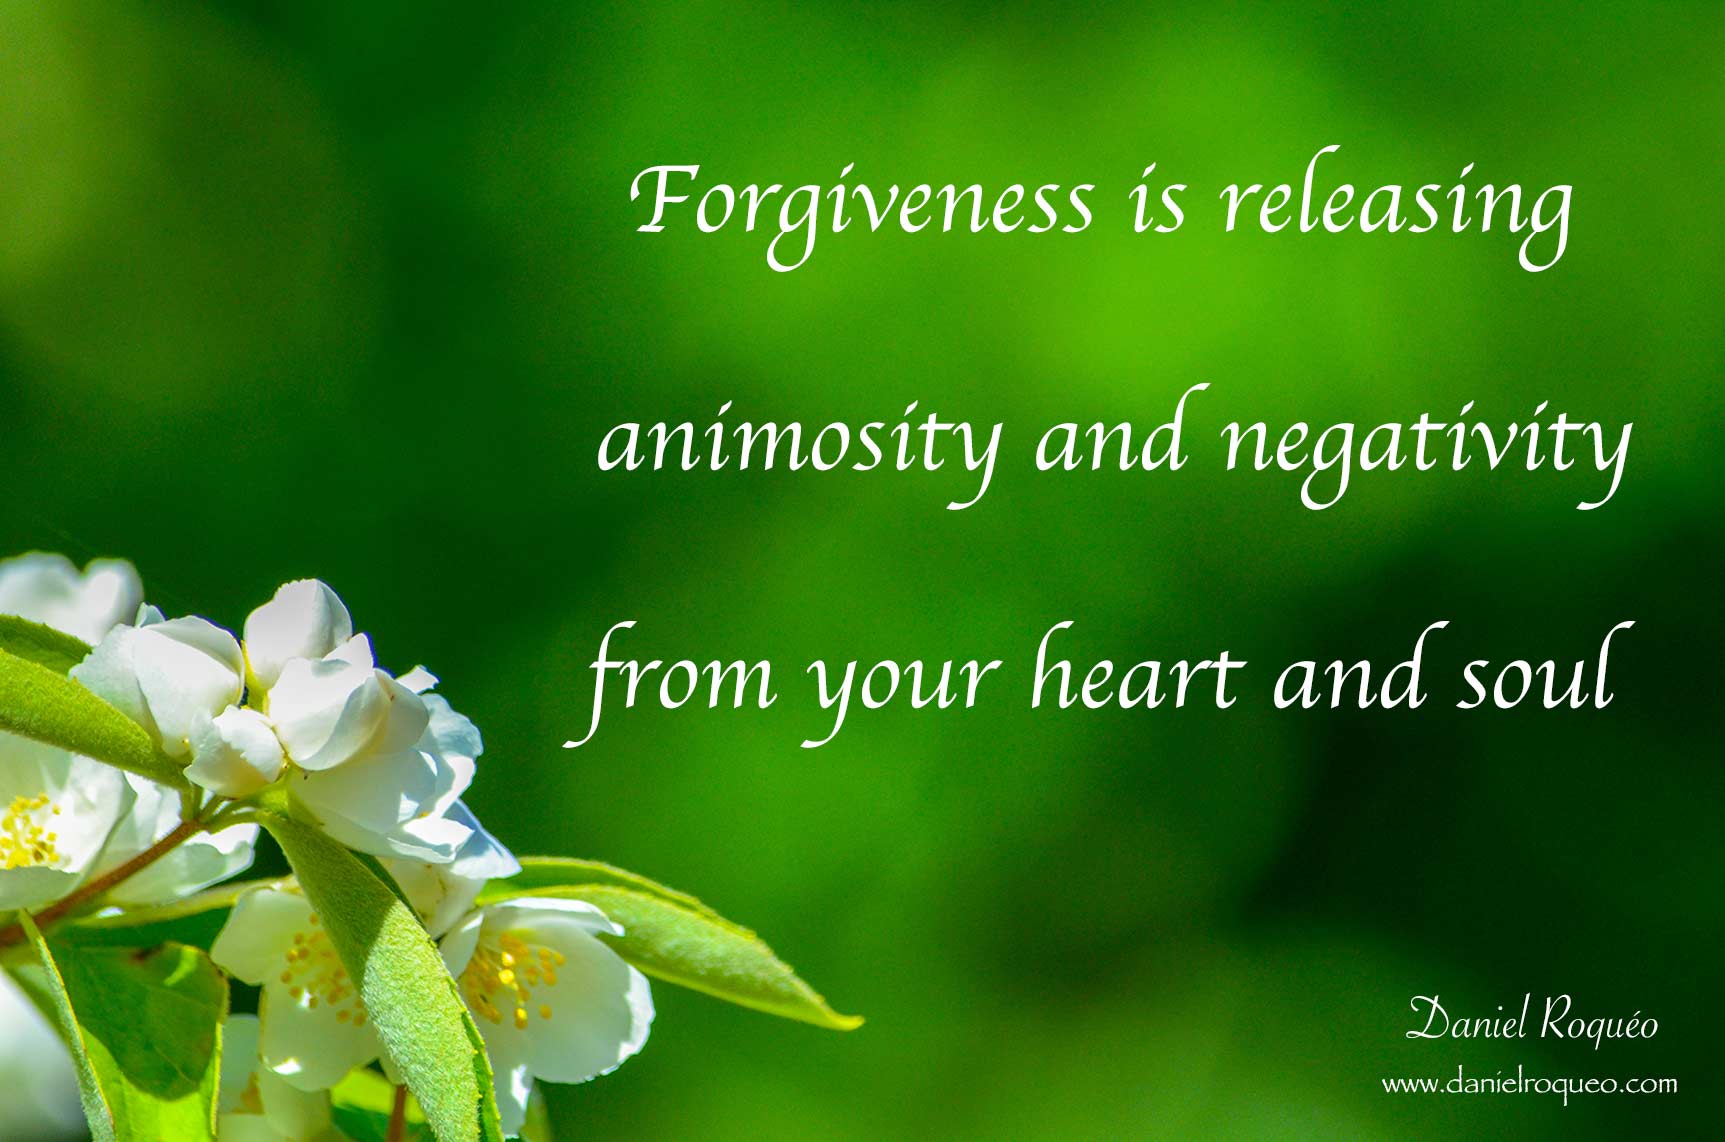 Forgiveness is releasing negativity from your heart and soul